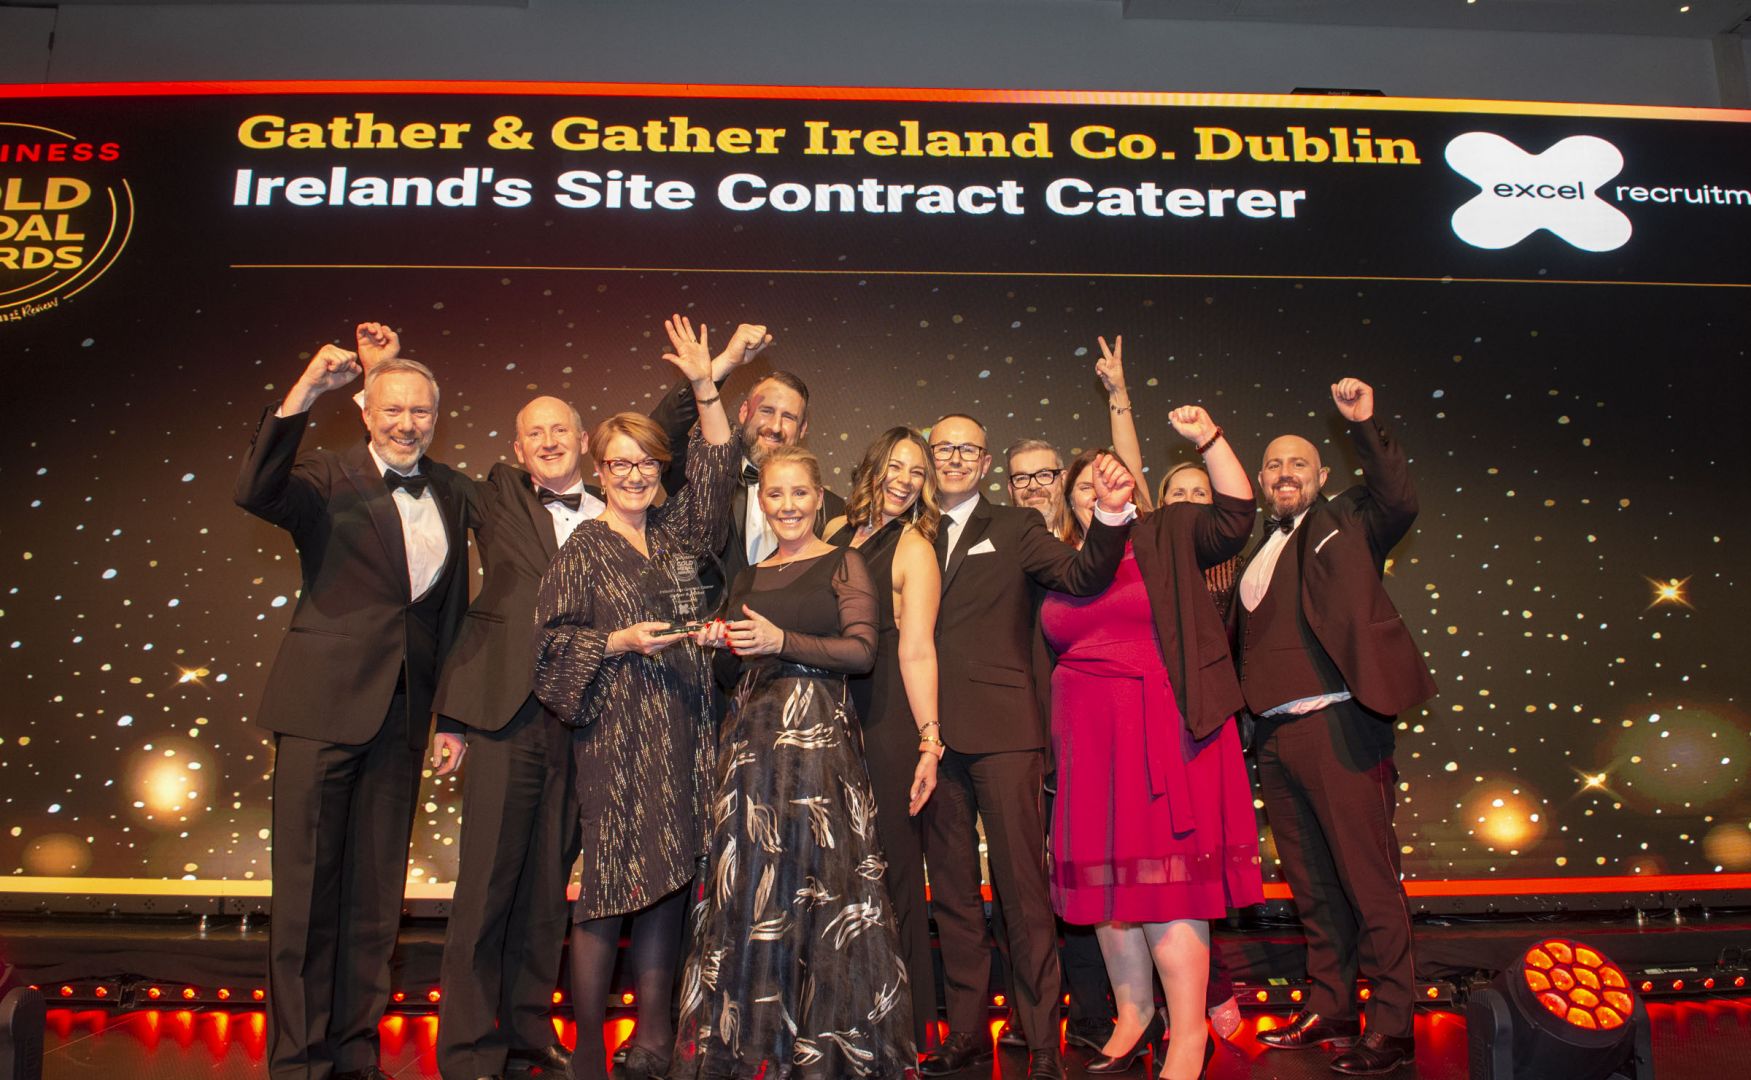 gather-gather-ireland-winners-of-top-irelands-site-contract-caterer-virgin-media-gold-medal-awards-2022-the-galmont-hotel-31st-jan-pic-murt-fahy-5